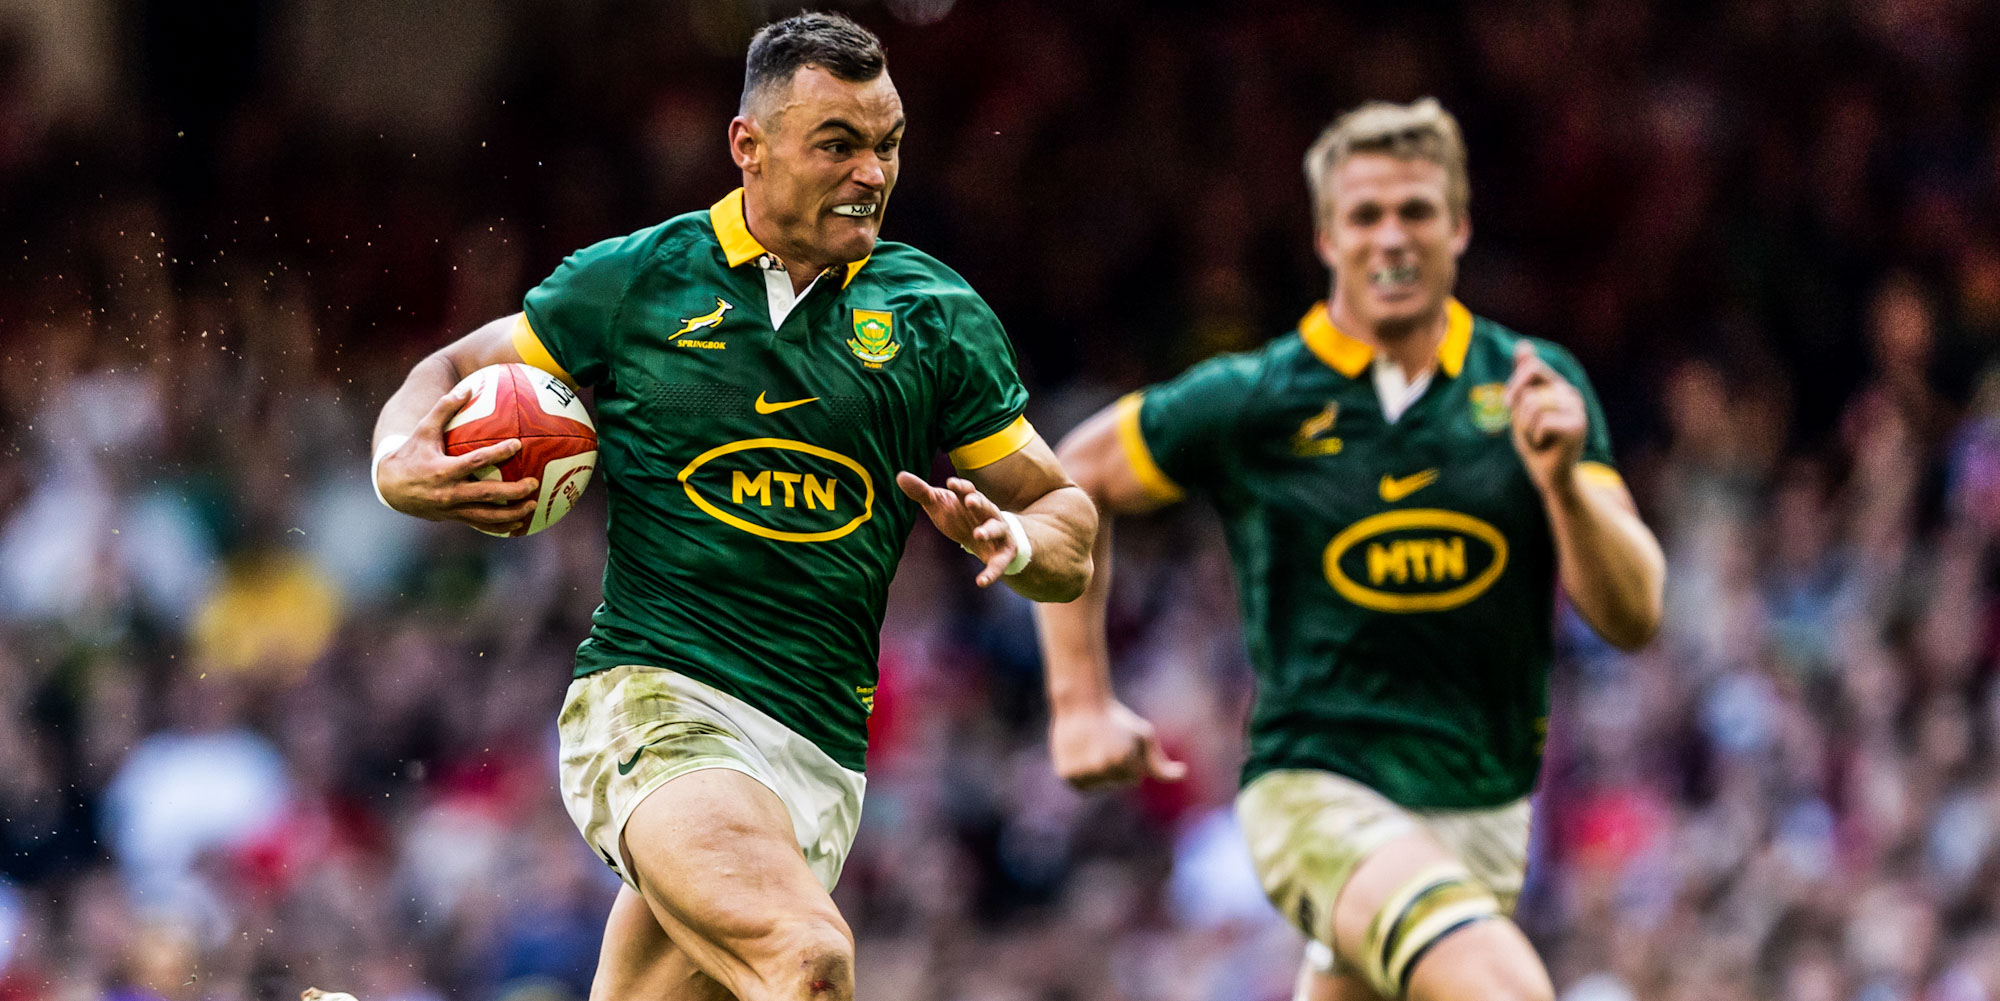 Jesse Kriel races away for his second try.